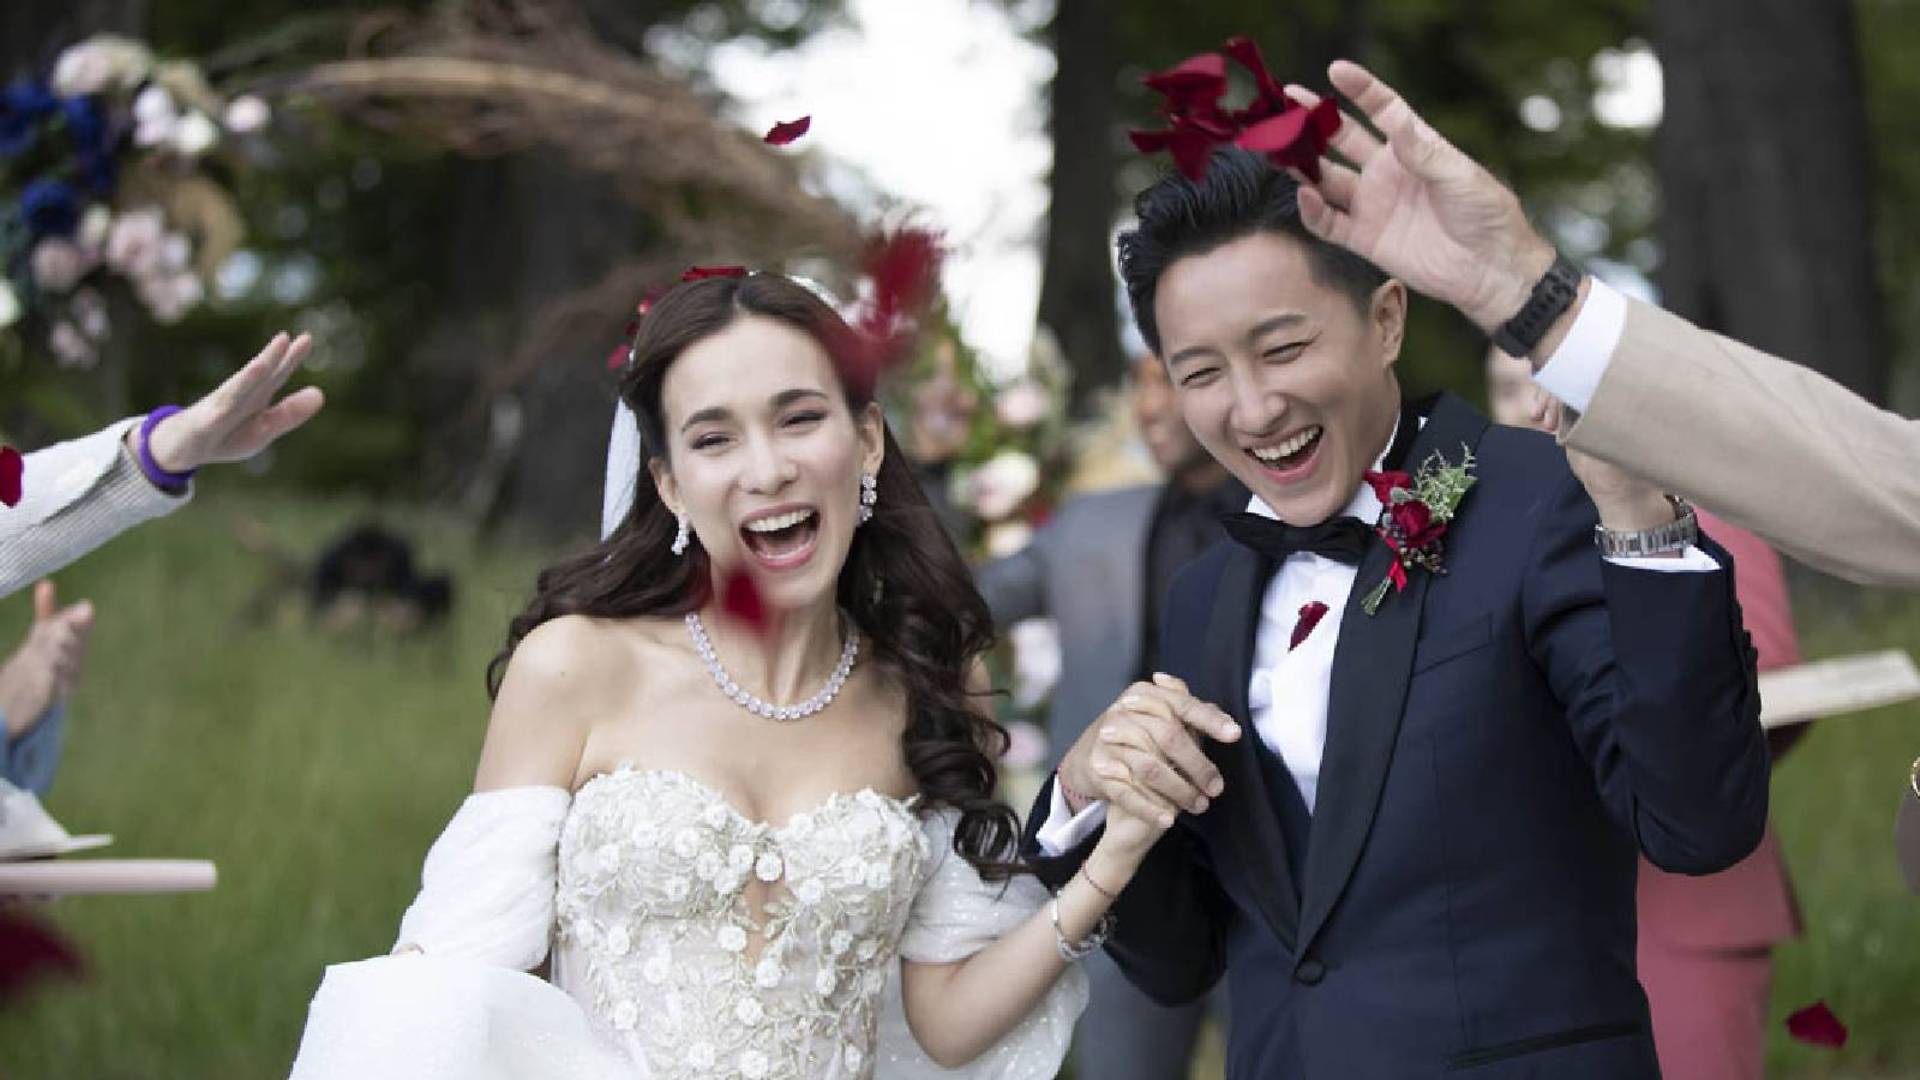 More picture from Han Geng and Celina Jade's New Zealand wedding revealed